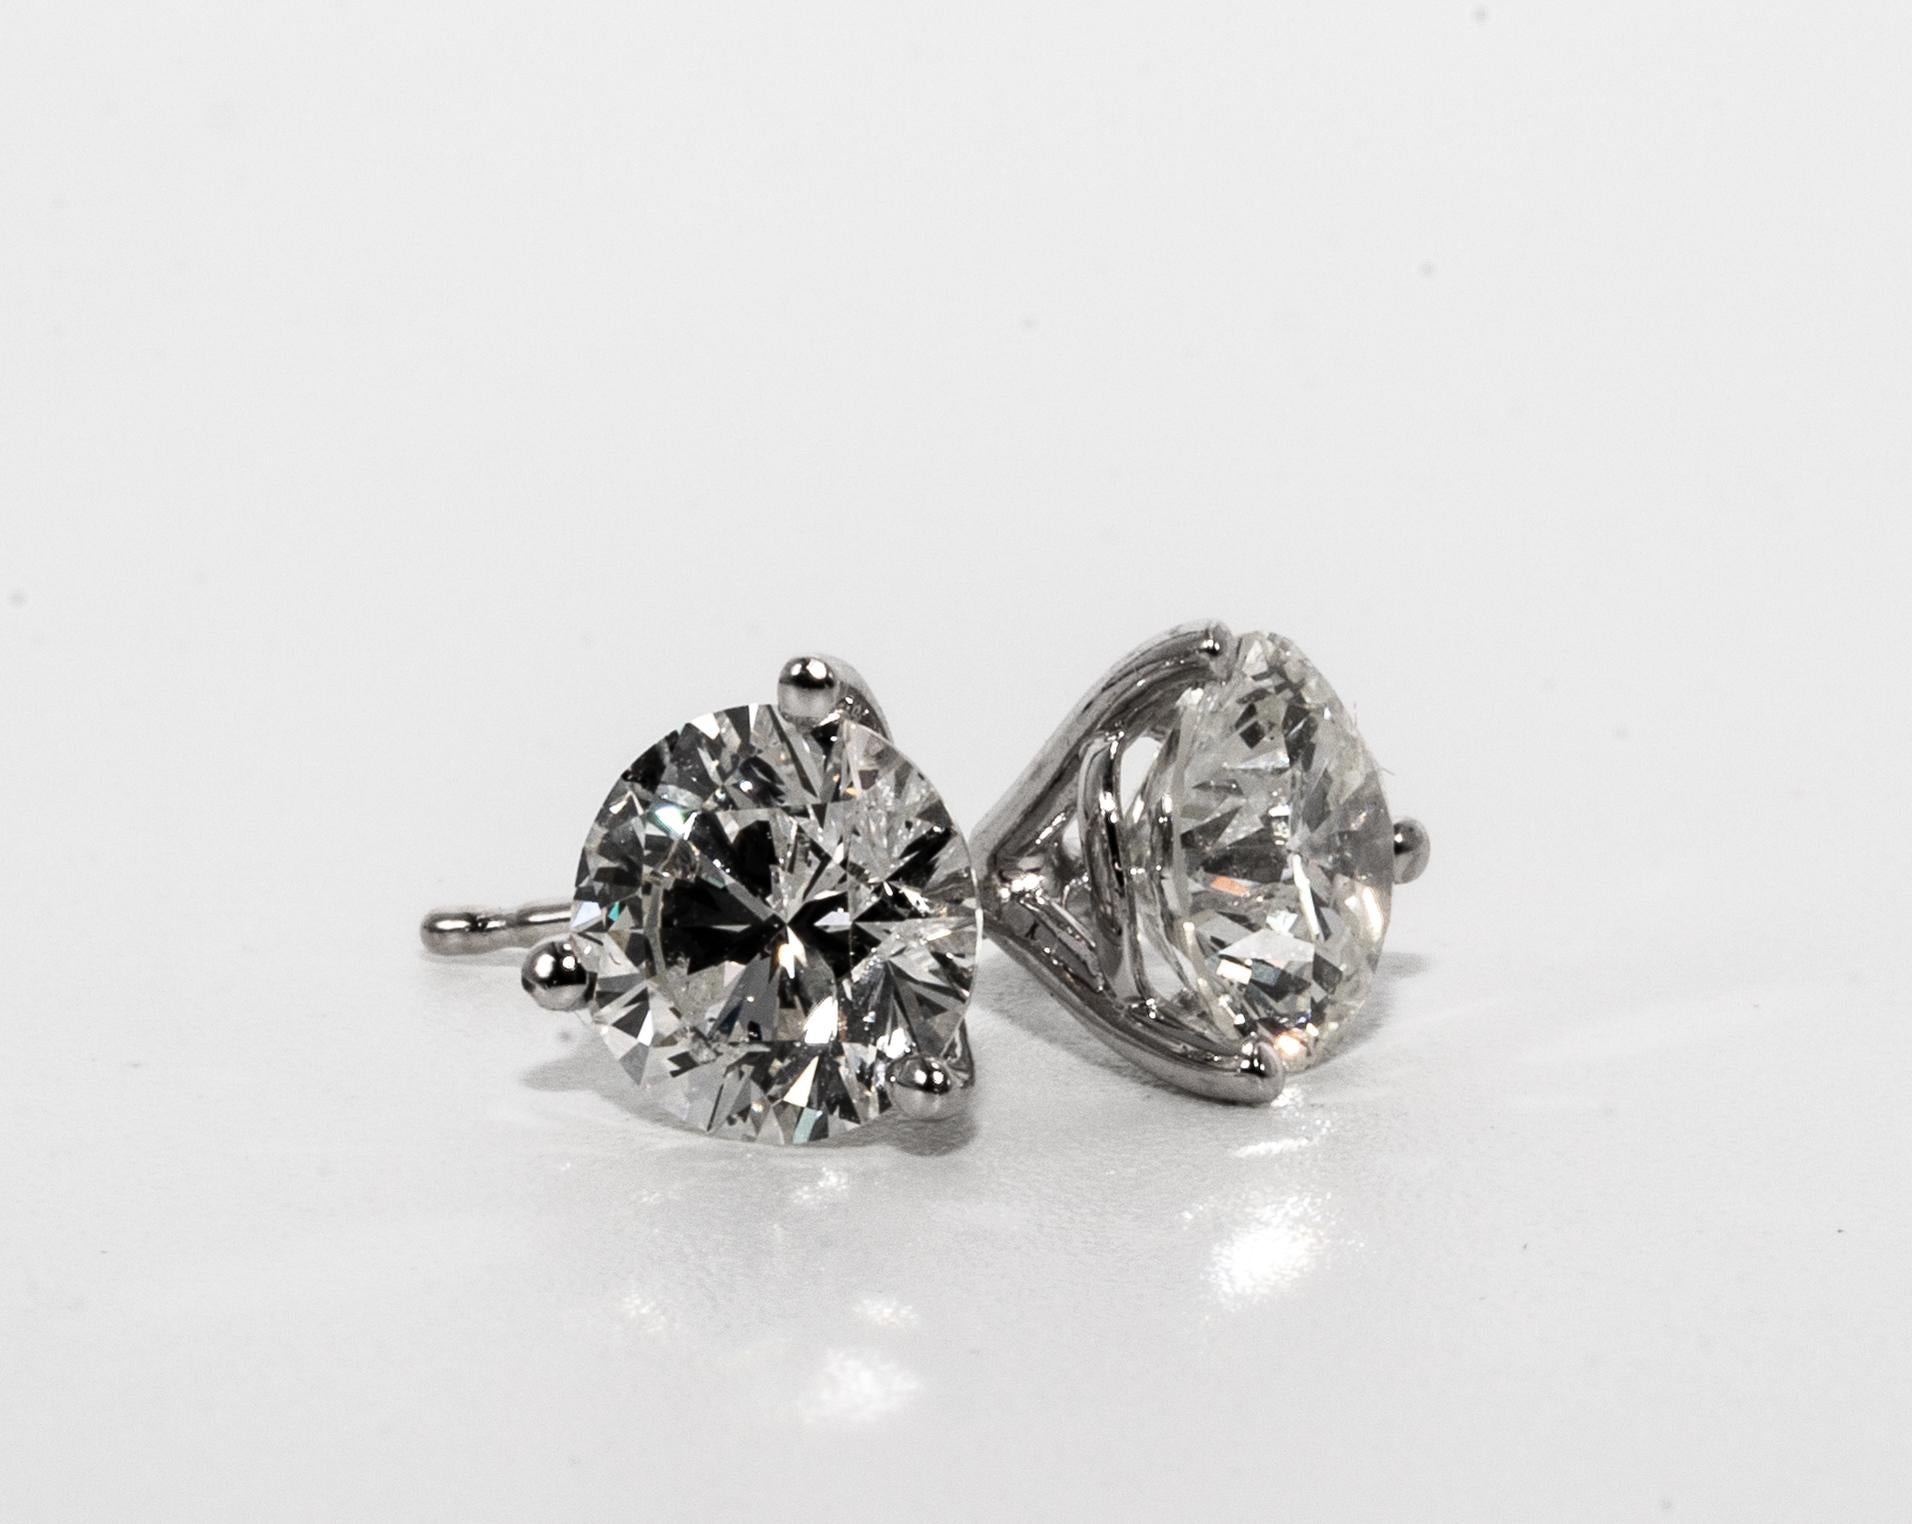 2.18 Carat Diamond Stud earrings in 14K White Gold
3 Prong Martini setting allows the earrings to sit flush without sagging ( with friction backs)
Color is I SI3, inclusions not visible to the eye
6.5 MM Diameter, beautifully cut and perfectly